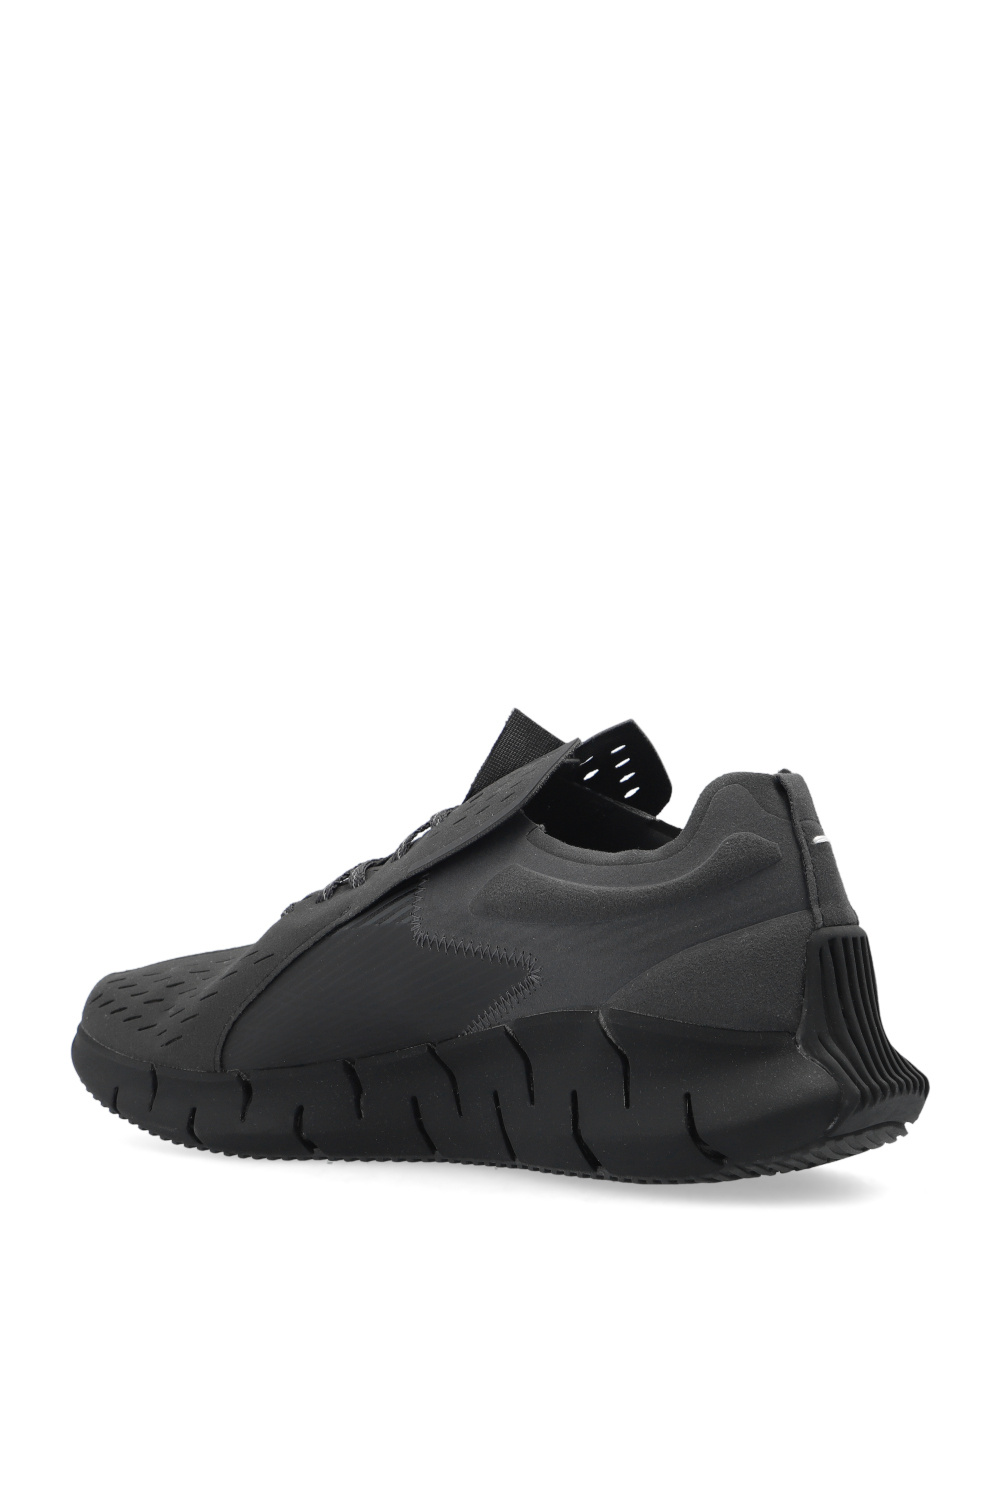 Maison Margiela ‘PROJECT 0 ZS MEMORY OF’ marant sneakers